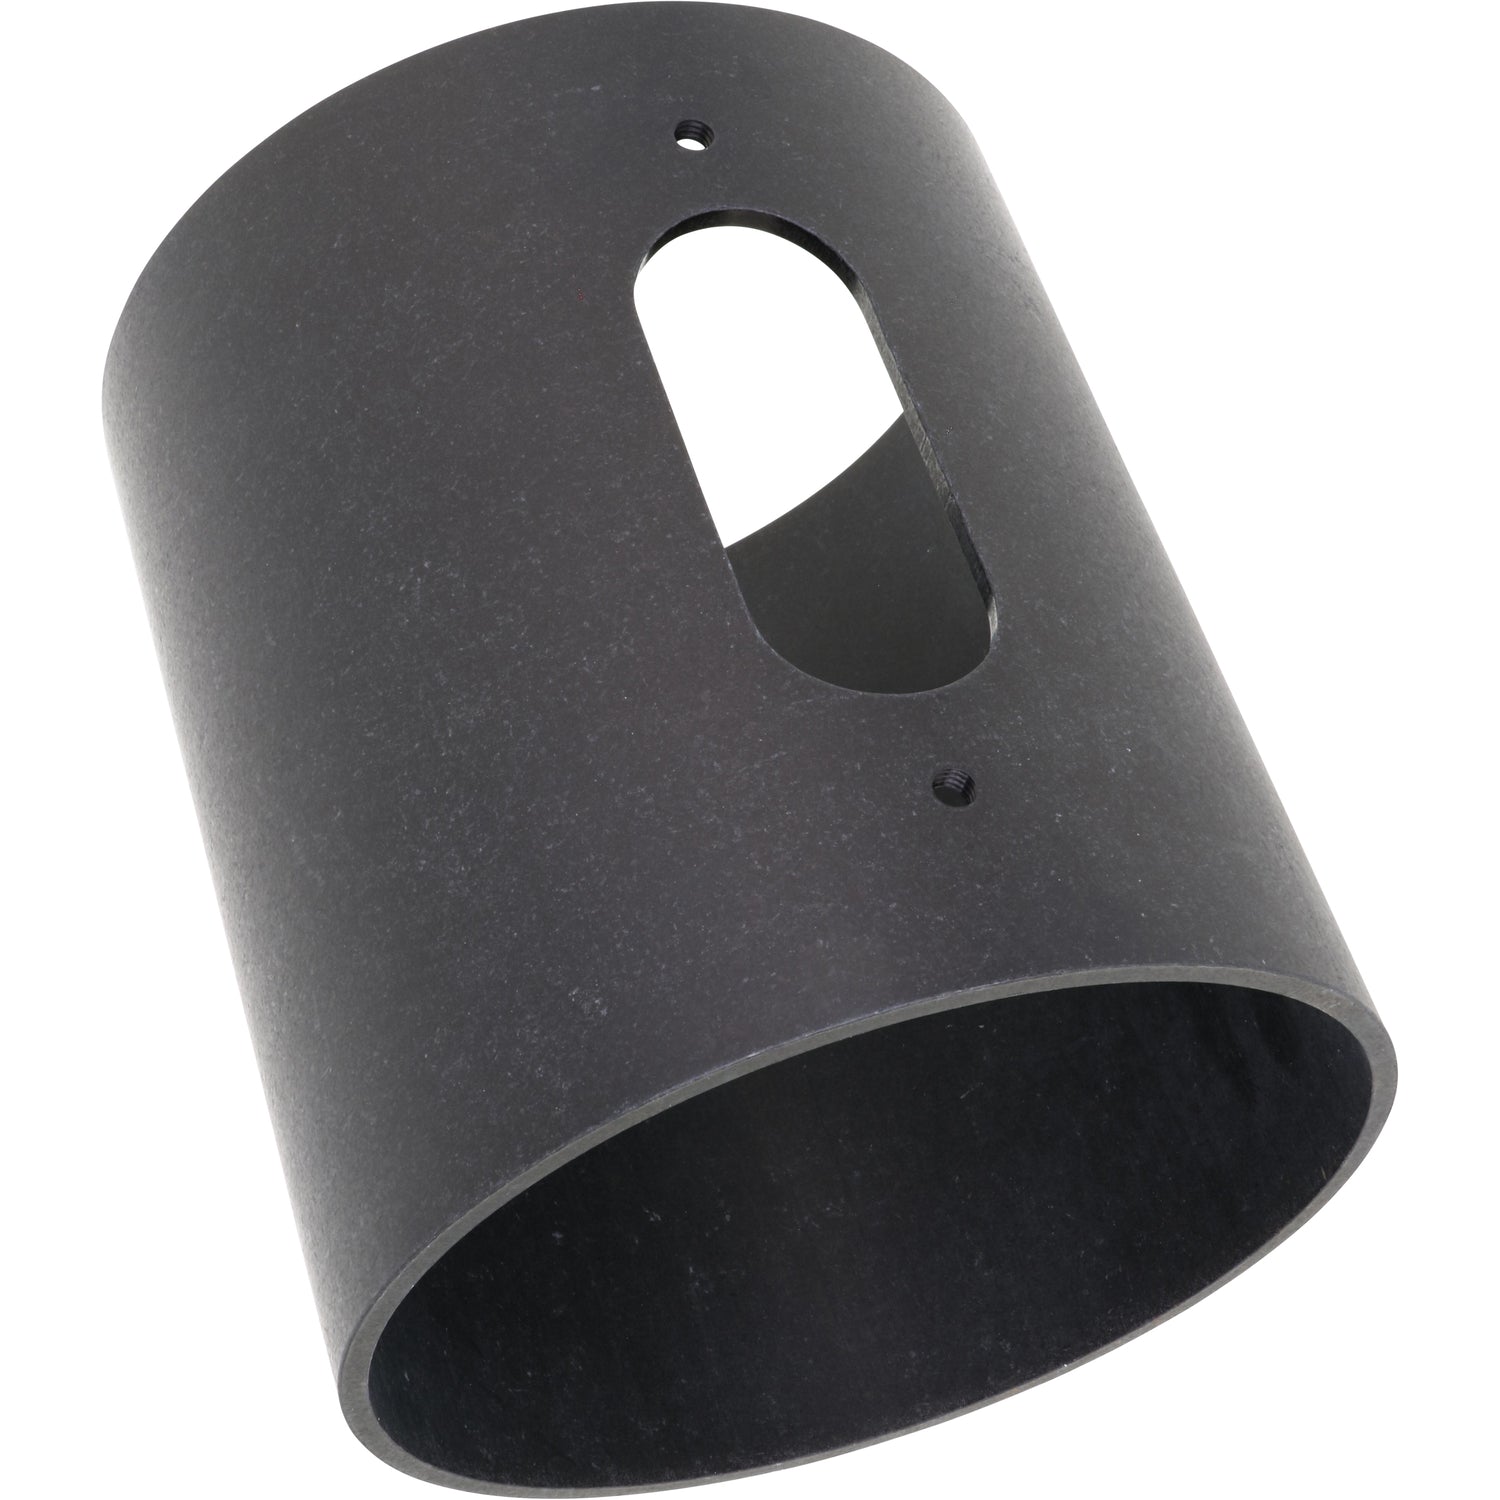 Cylindrical black anodized aluminum part with oval window on side. Part shown on white background. 